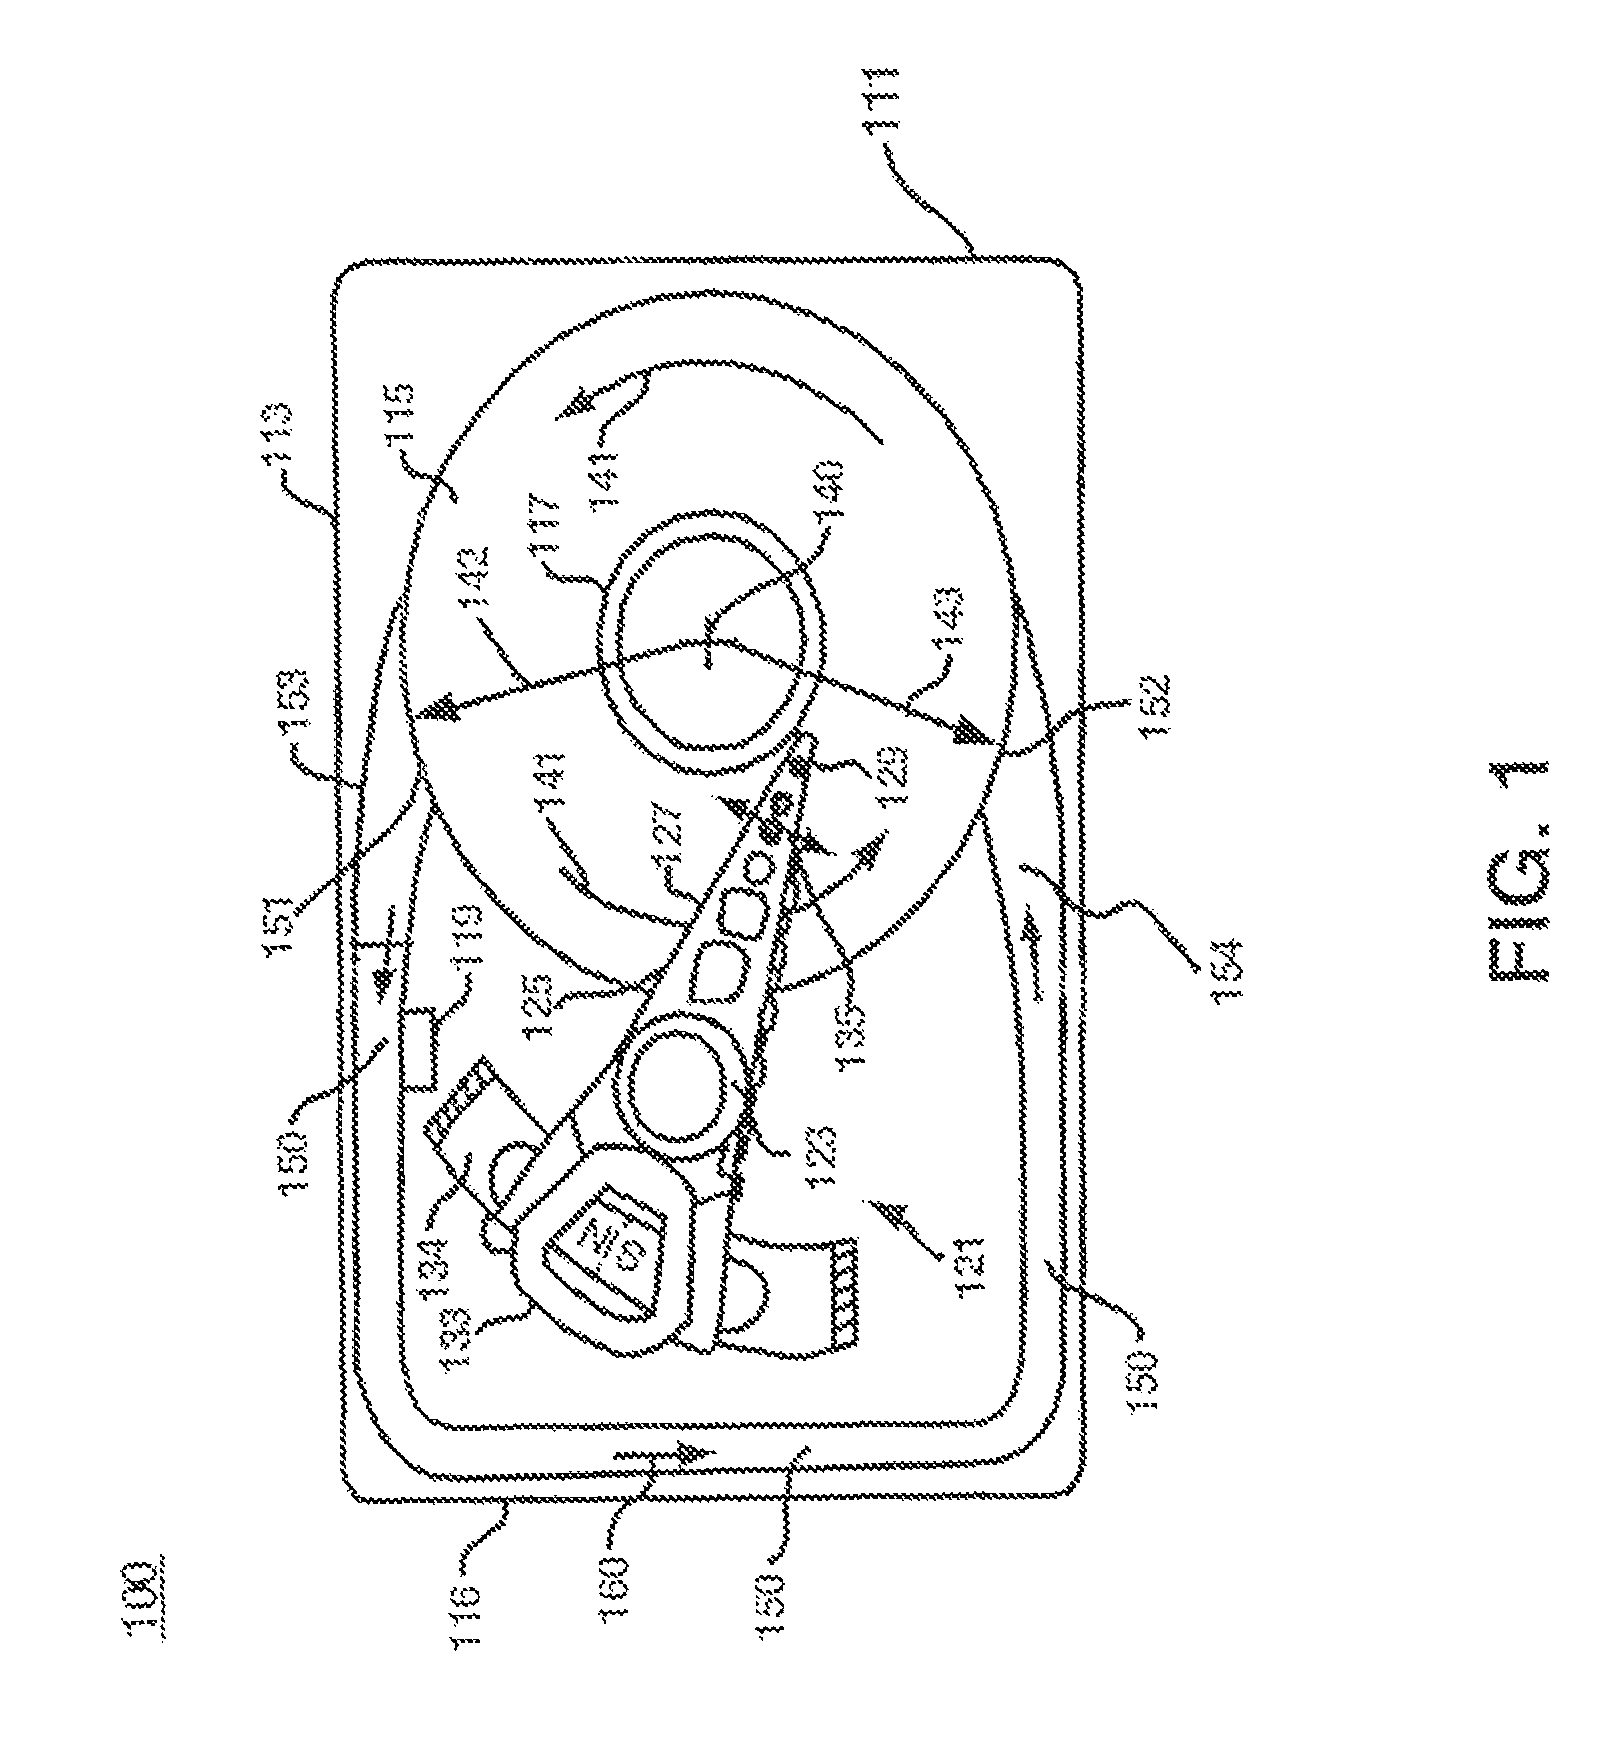 Apparatus and method for reducing particle accumulation in a hard disk drive